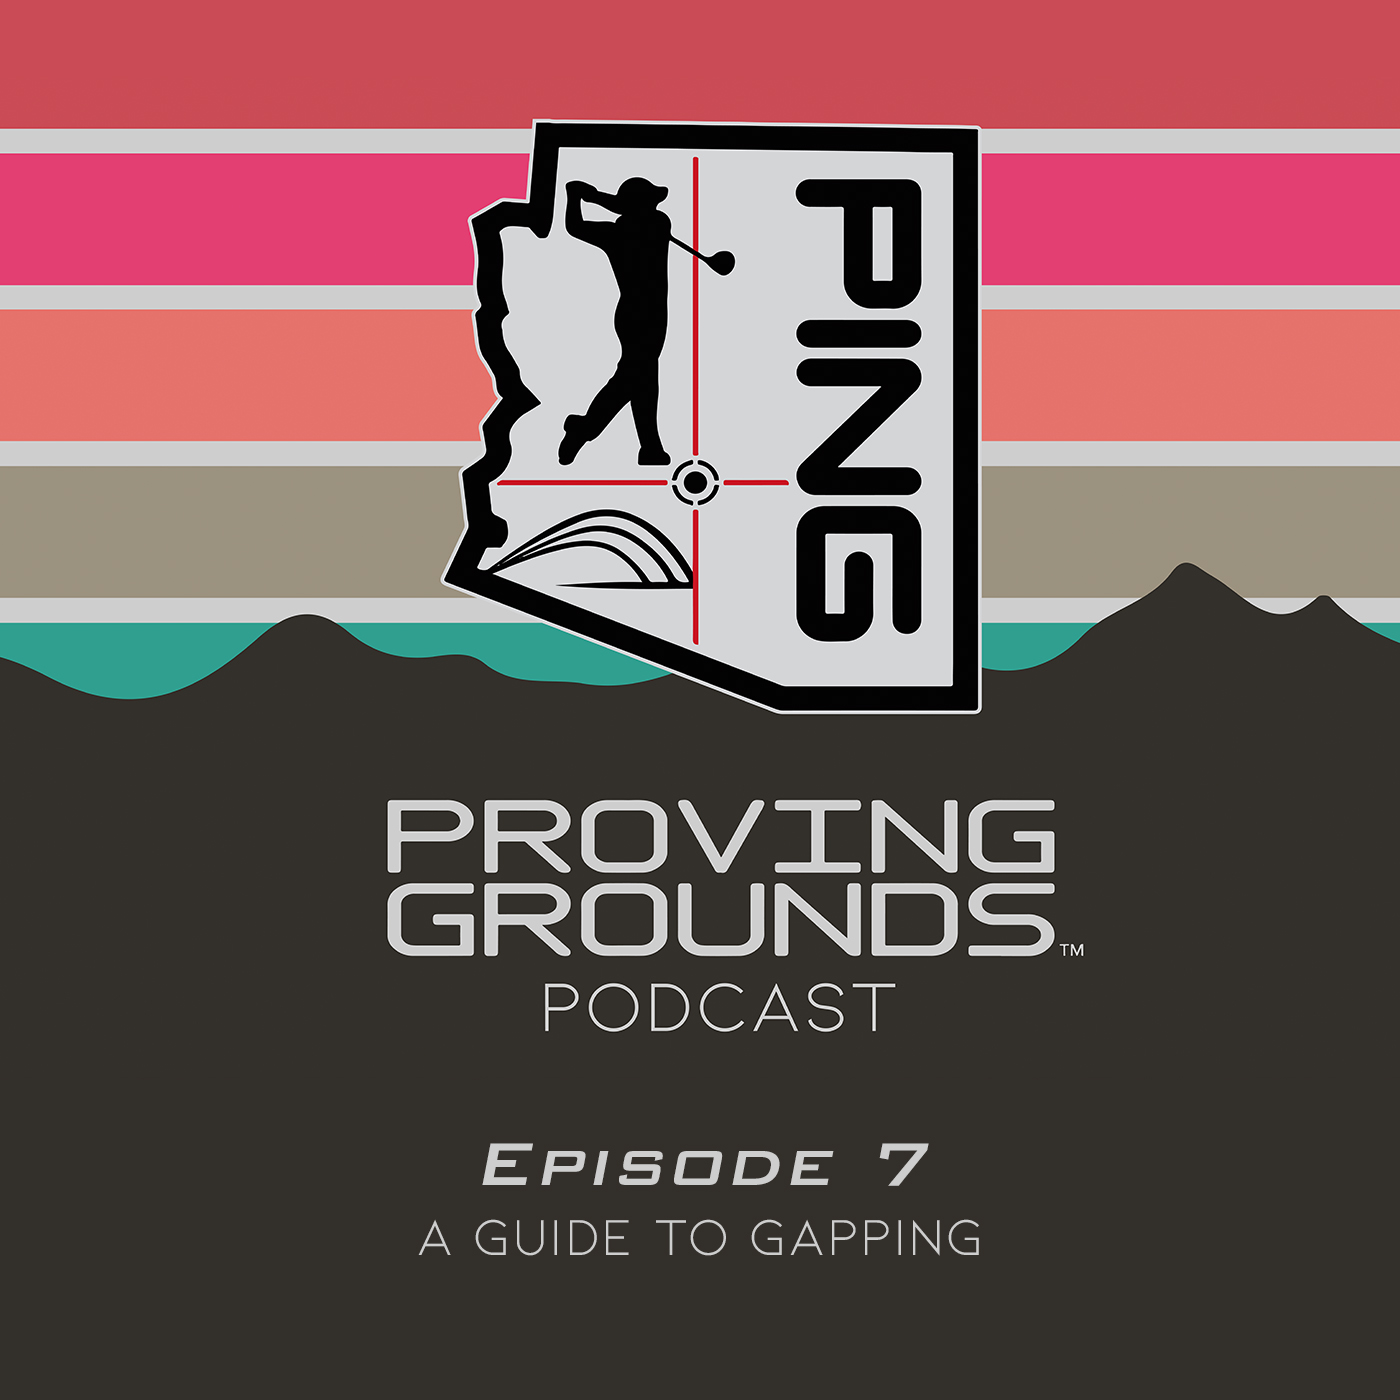 Episode 7: A Guide to Gapping